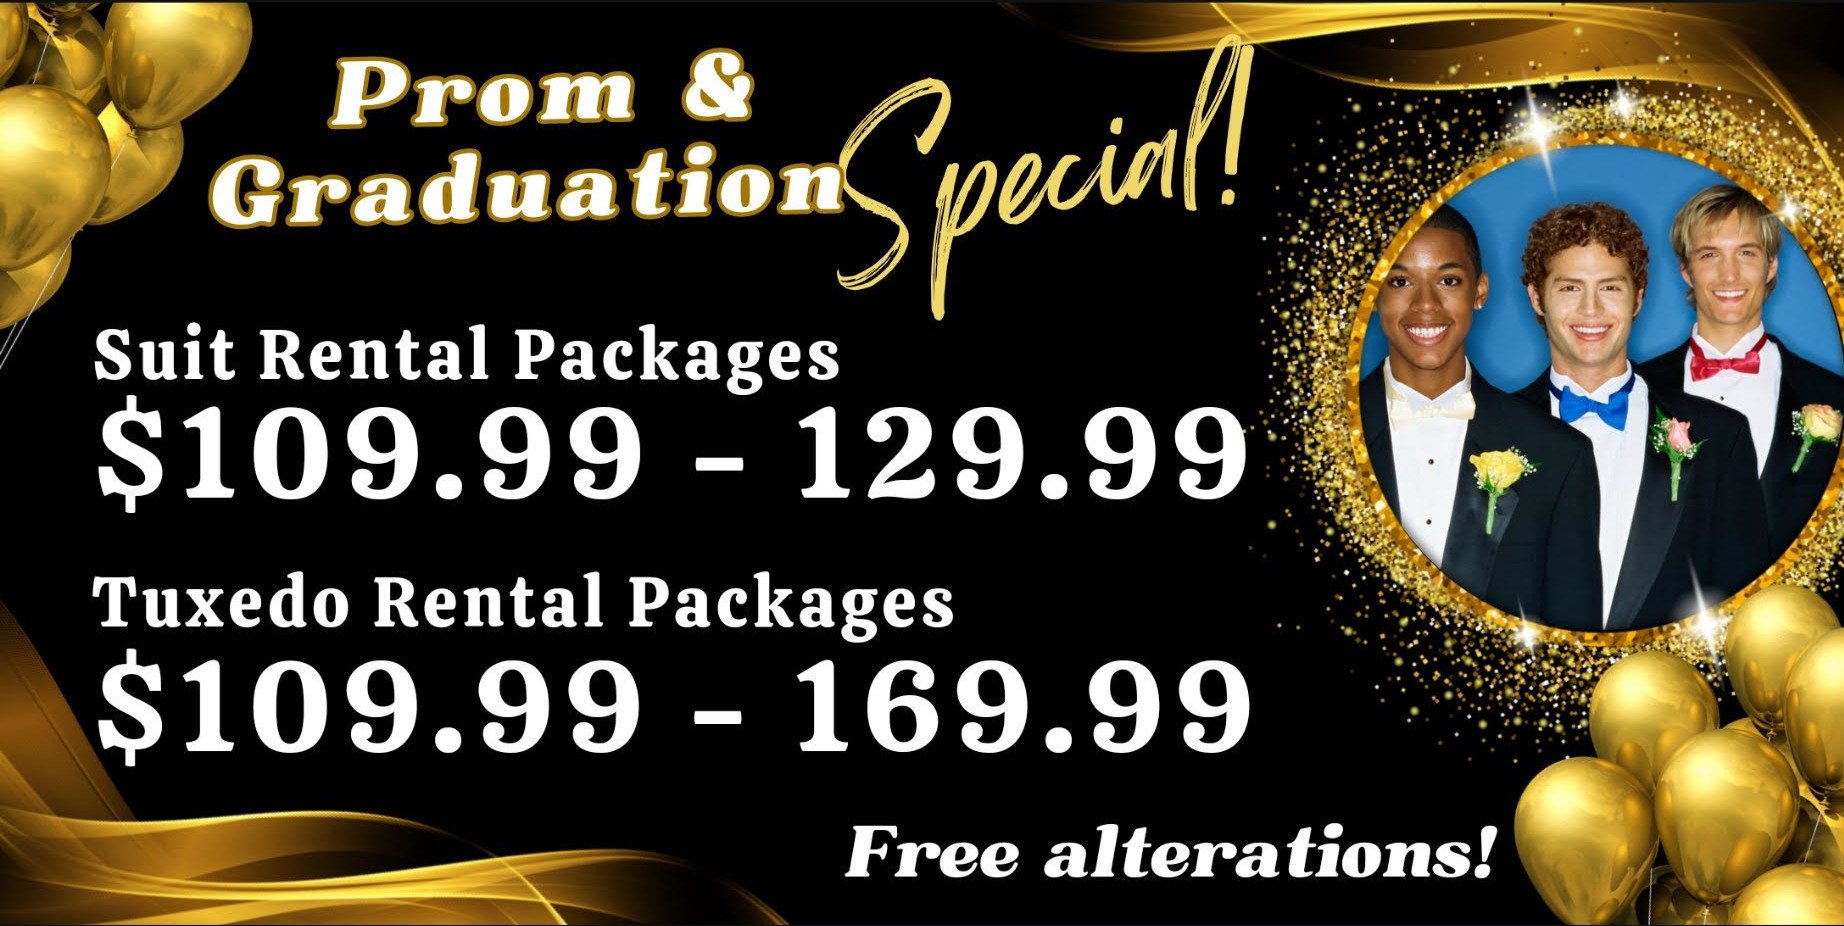 Spring Graduation and Prom Tuxedo & Suit Specials in Windsor